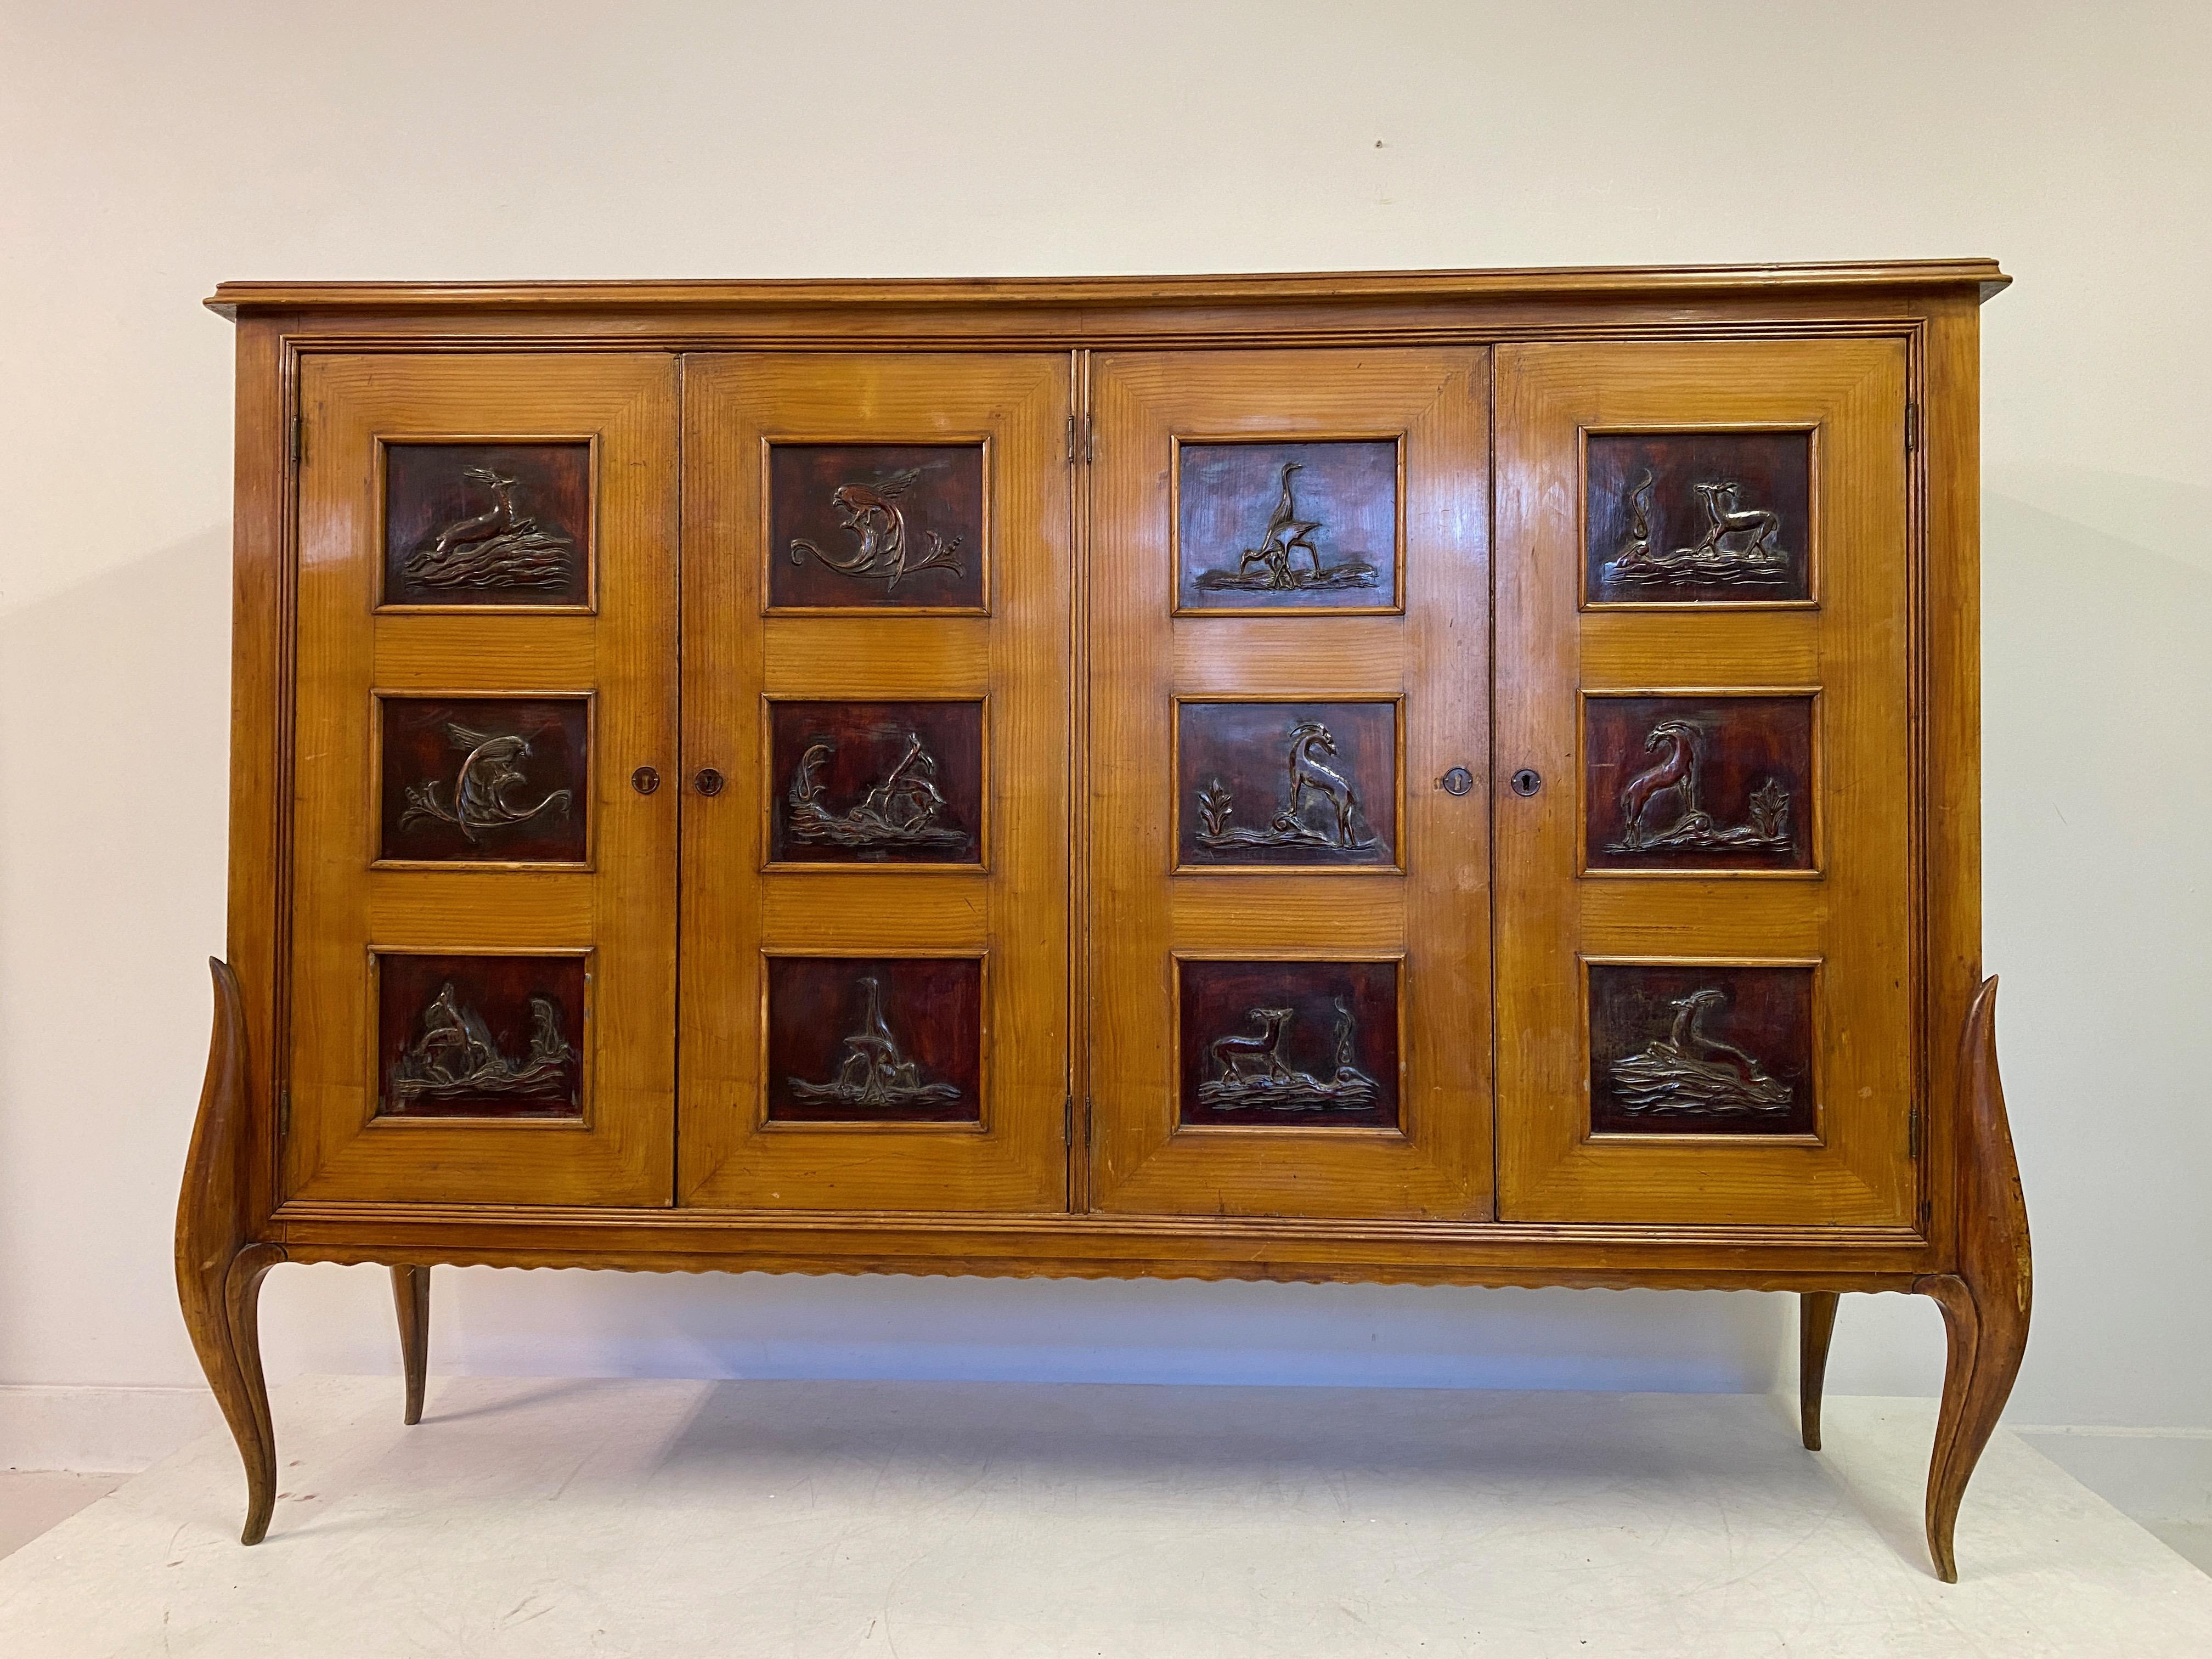 1940s Italian Cabinet Attributed to Pierluigi Colli In Good Condition For Sale In London, London